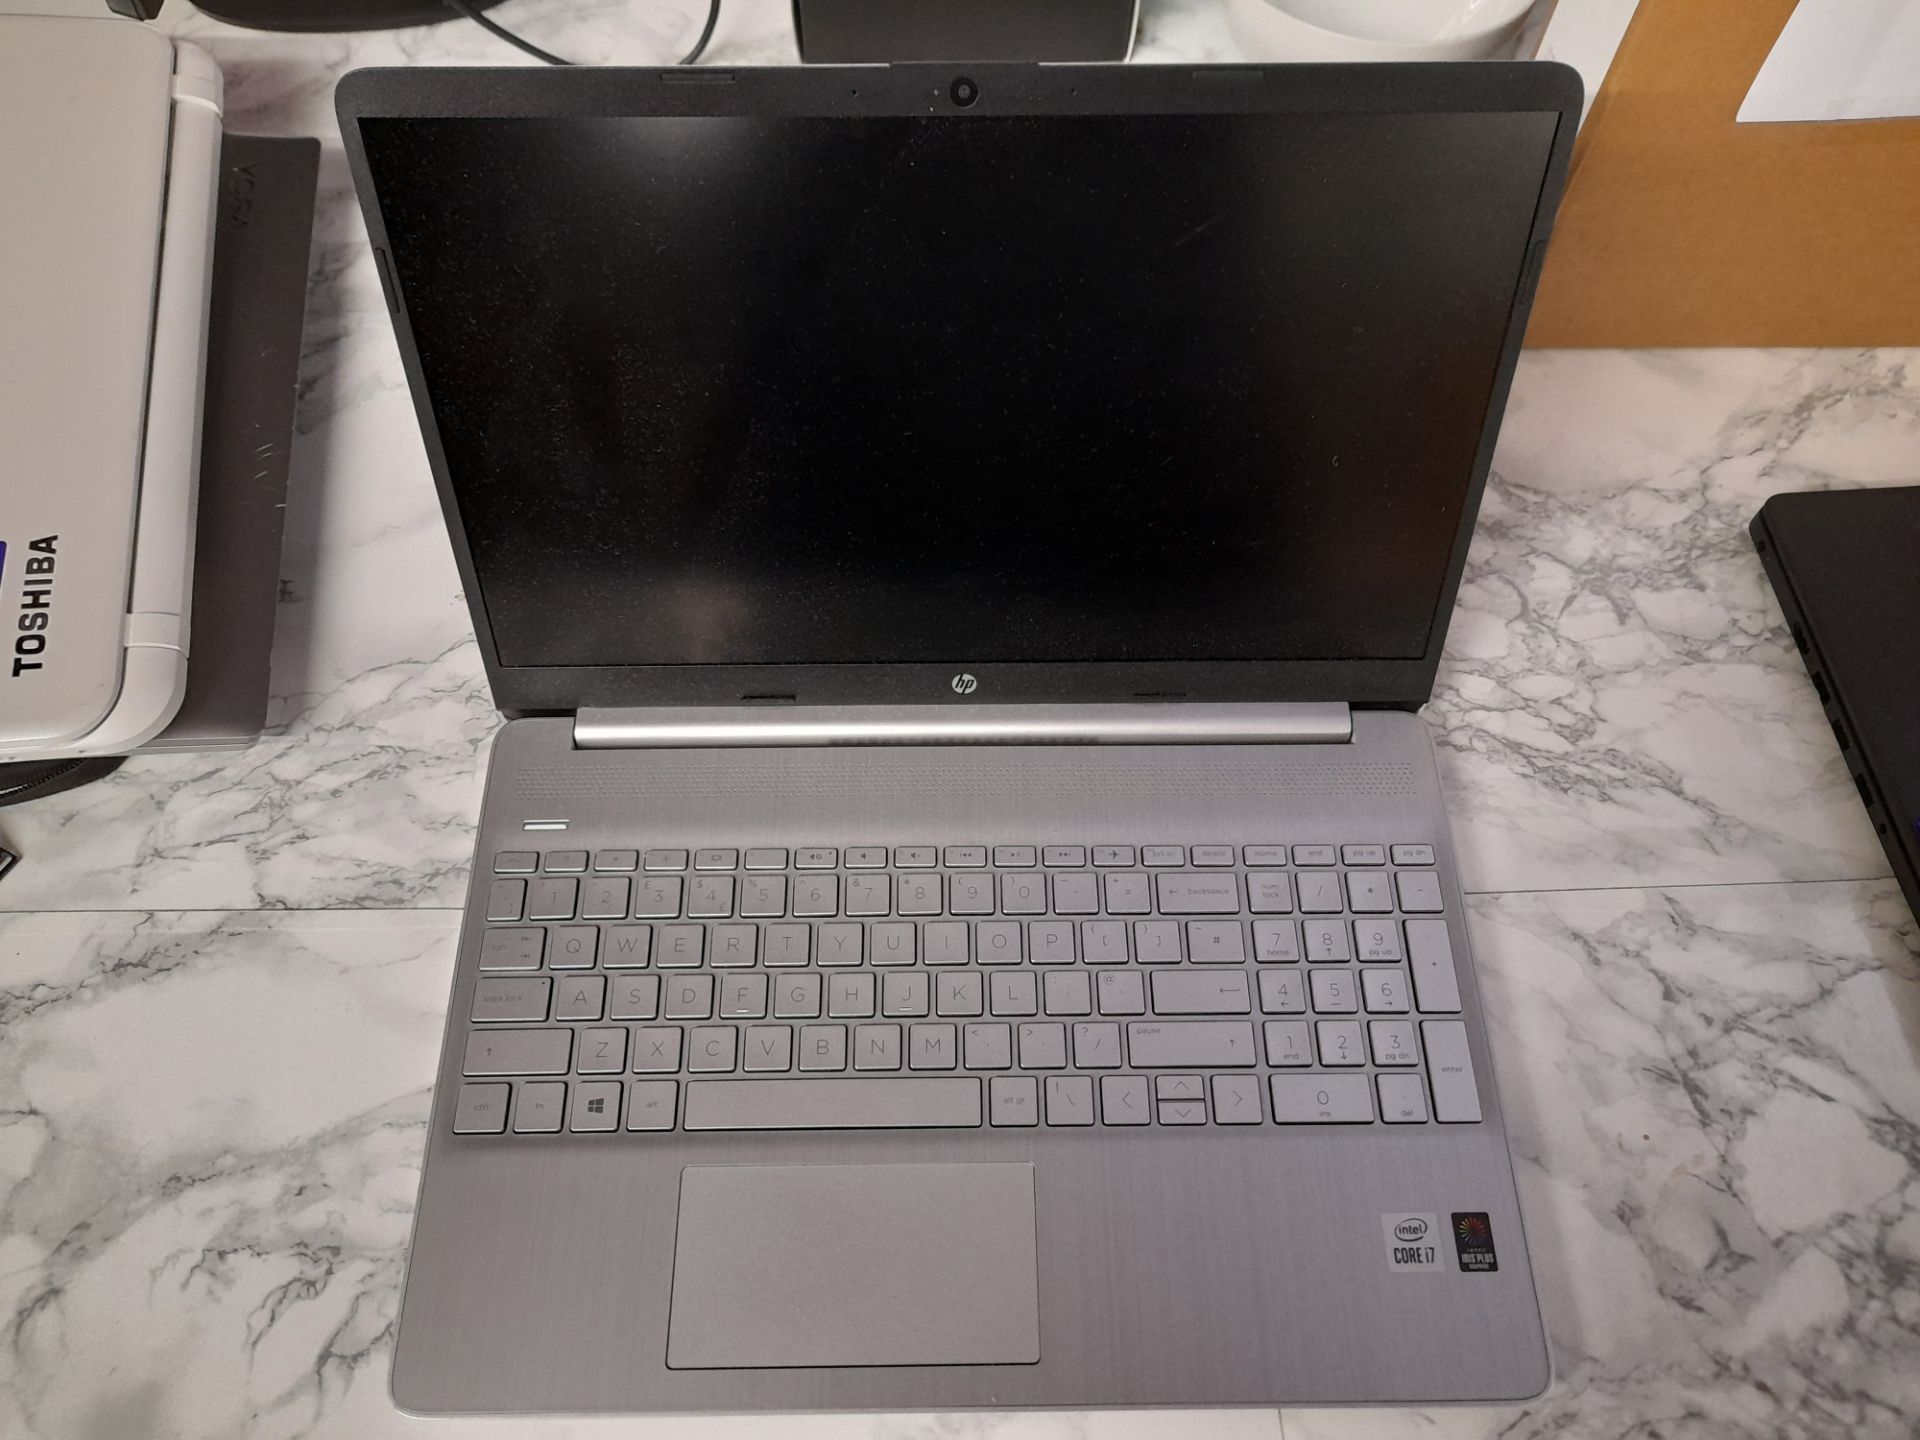 HP laptop, Model 15s-fq1006na, Serial Number 5CD039PY2L, with Intel Core i7, no charger - Image 2 of 4